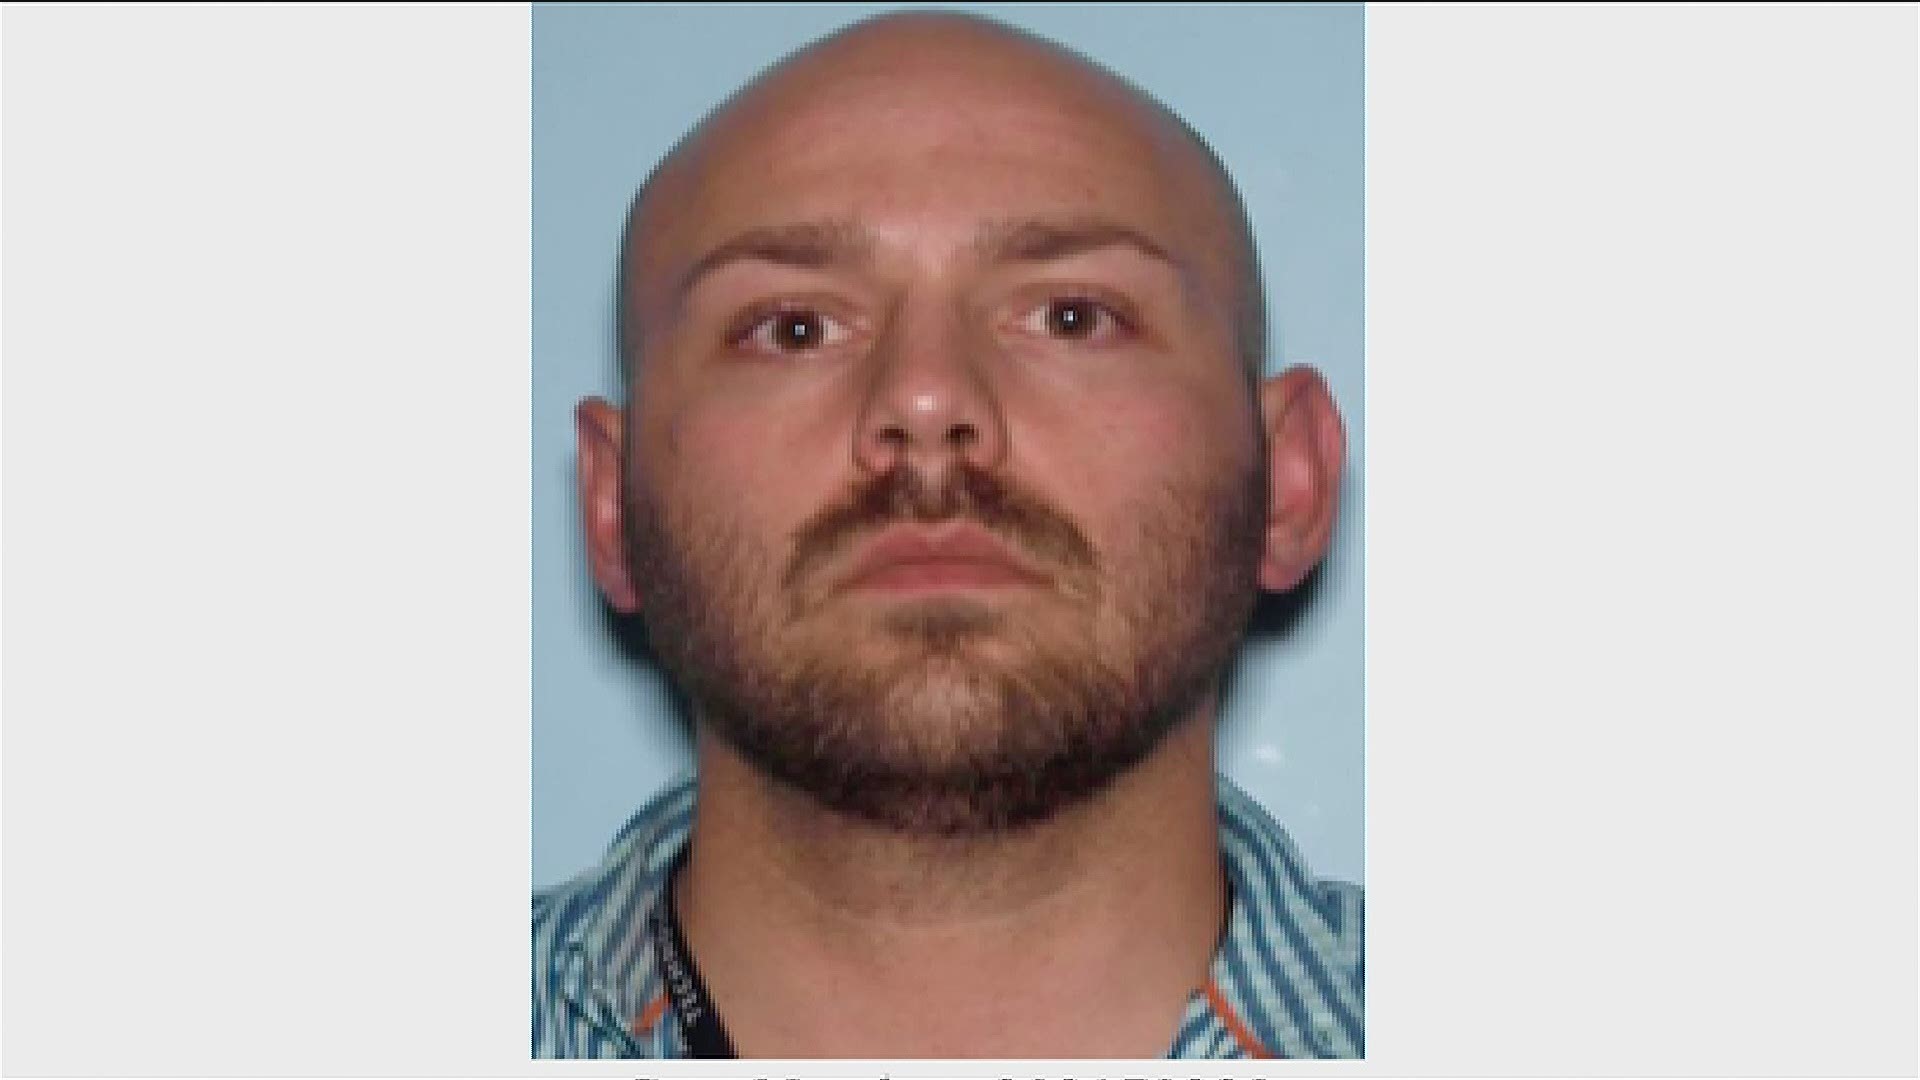 Kent, New York Police department says the suspect – identified by Atlanta Police as Benjamin Fancher – was taken into custody and is waiting to be arraigned.